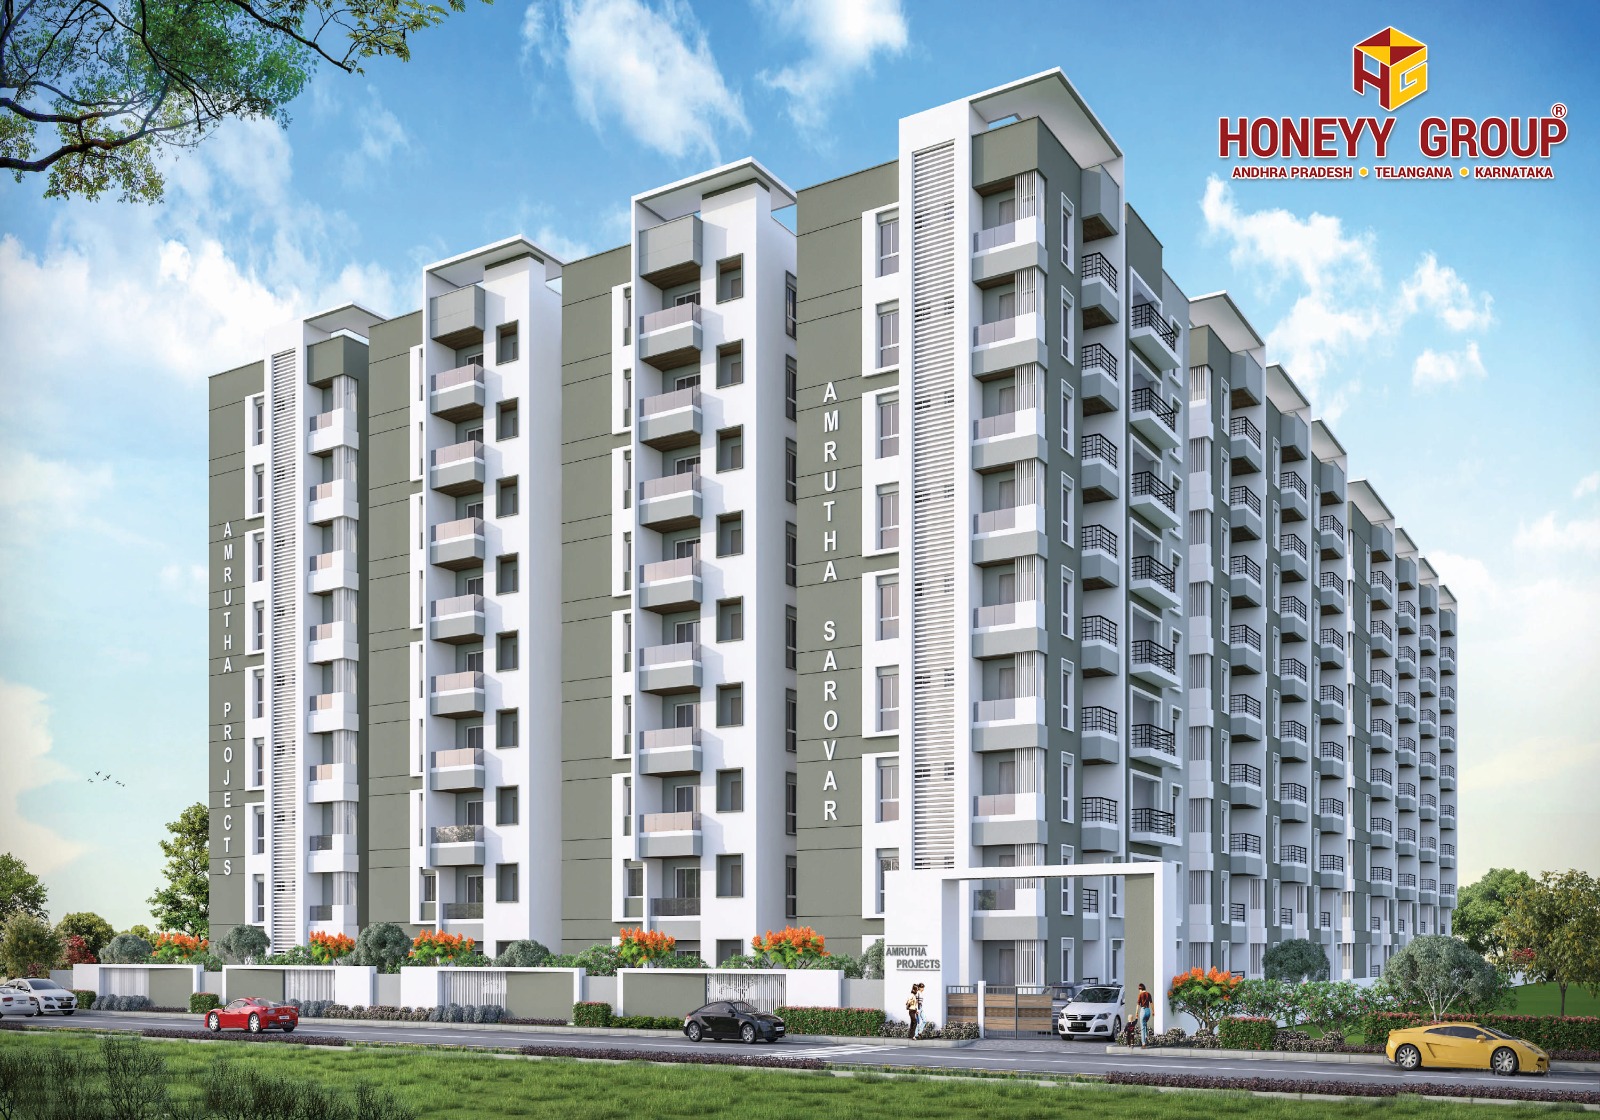 Honey Group's Apartment Flats For Sale in Kompally, Hyderabad.